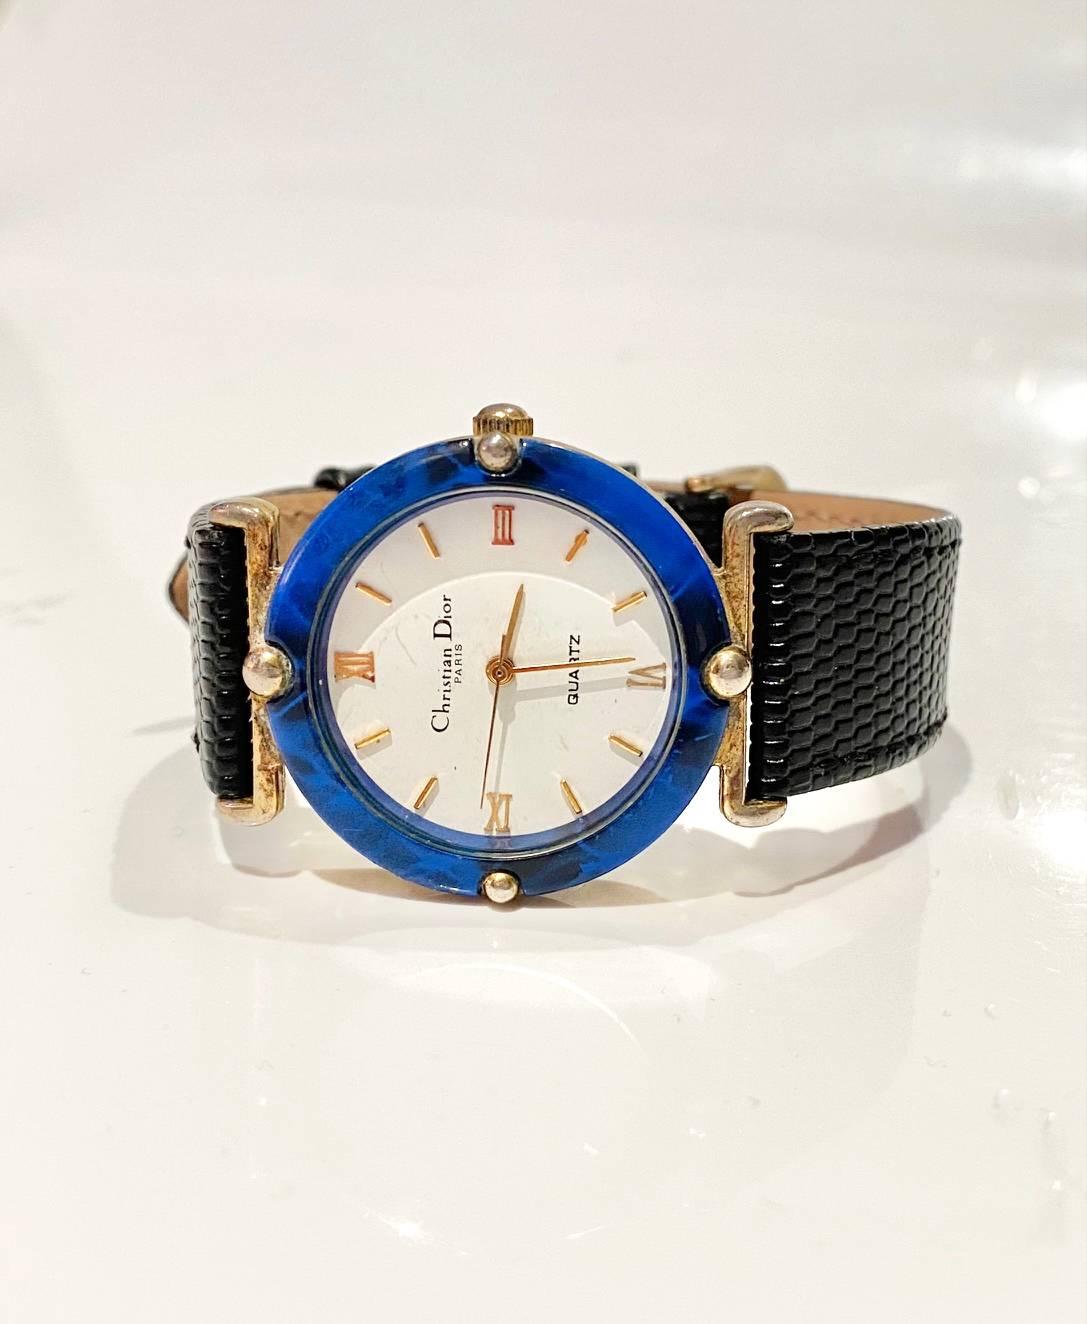 Vintage Christian Dior quartz watch, blue stone round face, Roman numbers, gold tone, water resistant, blue leather strap (replacement)

Condition: good vintage, 1980s, fully working, small sign of wear on glass as visible on pictures